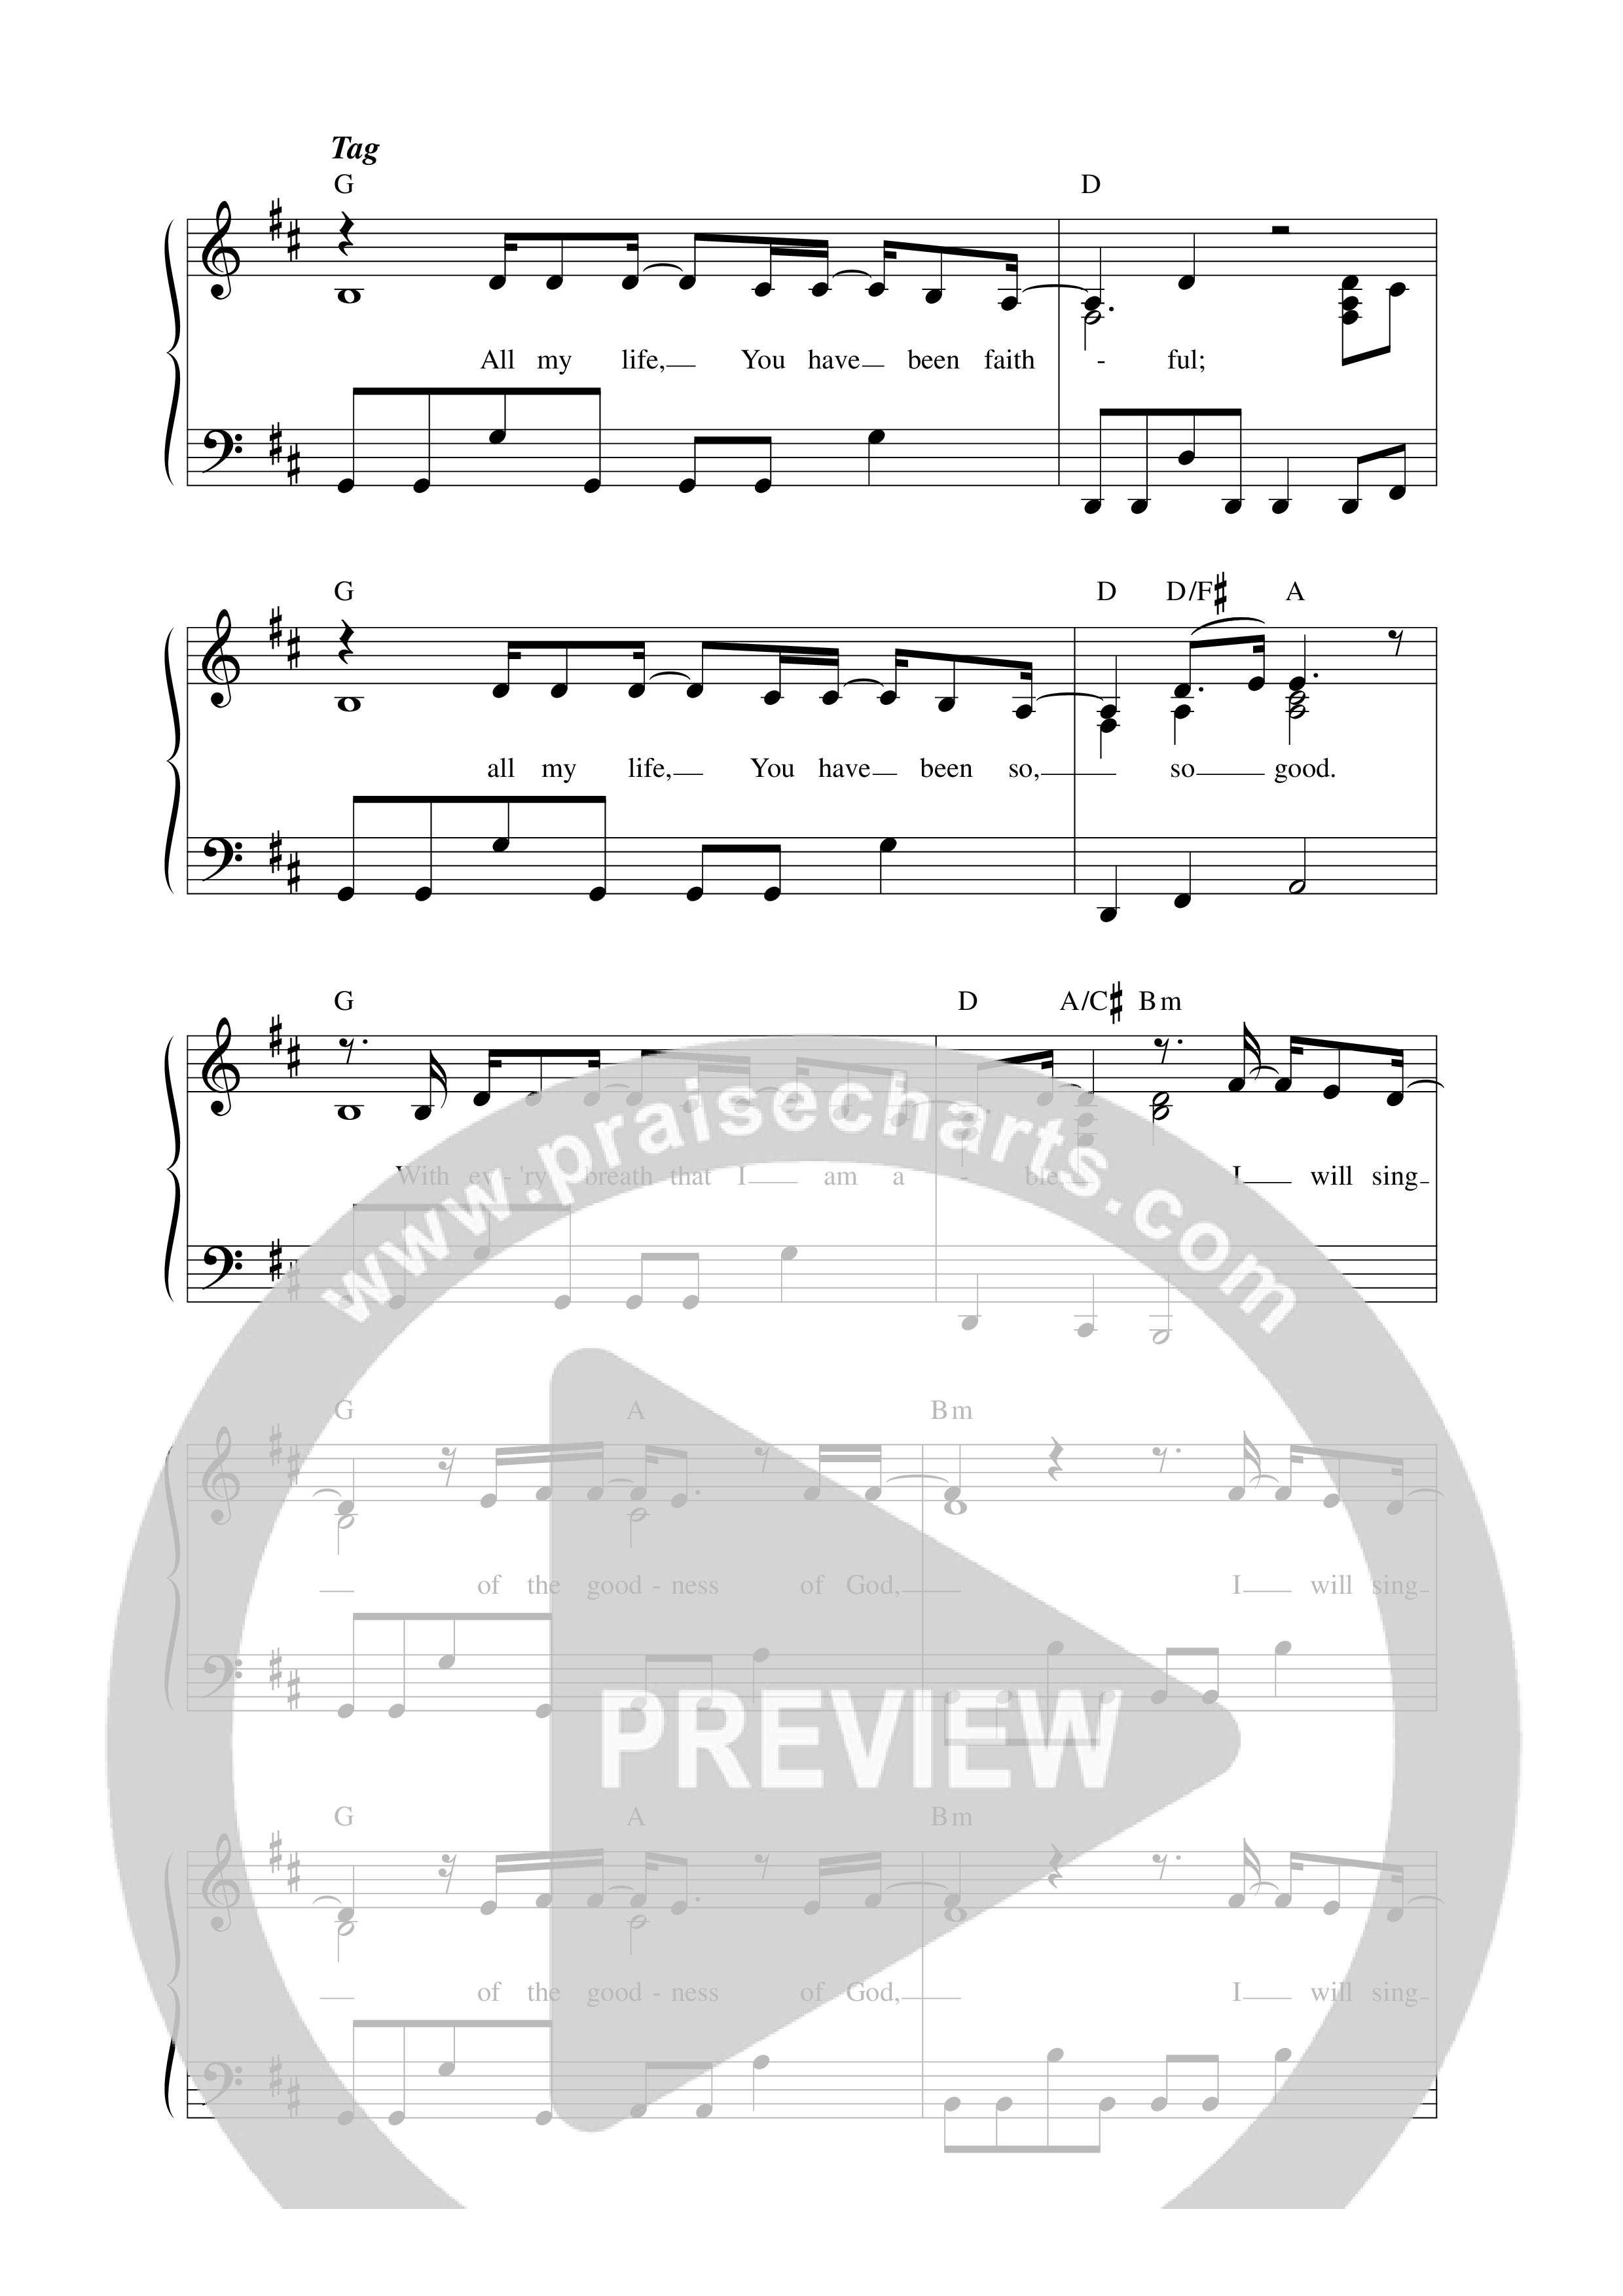 Goodness Of God Lead Sheet Melody (ICF Worship)